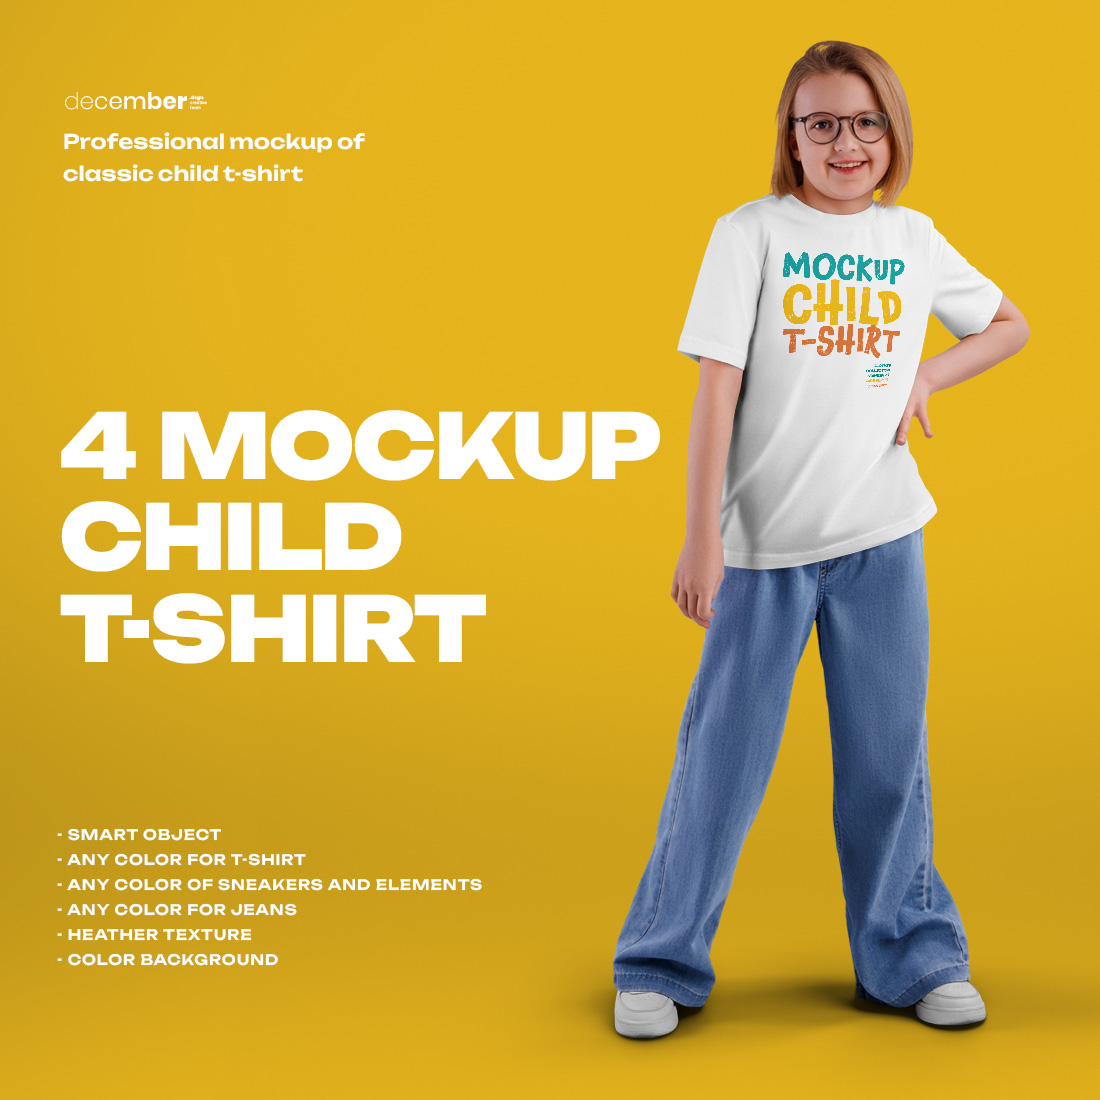 4 Mockups of a Children's T-shirt on a Girl with Glasses cover image.